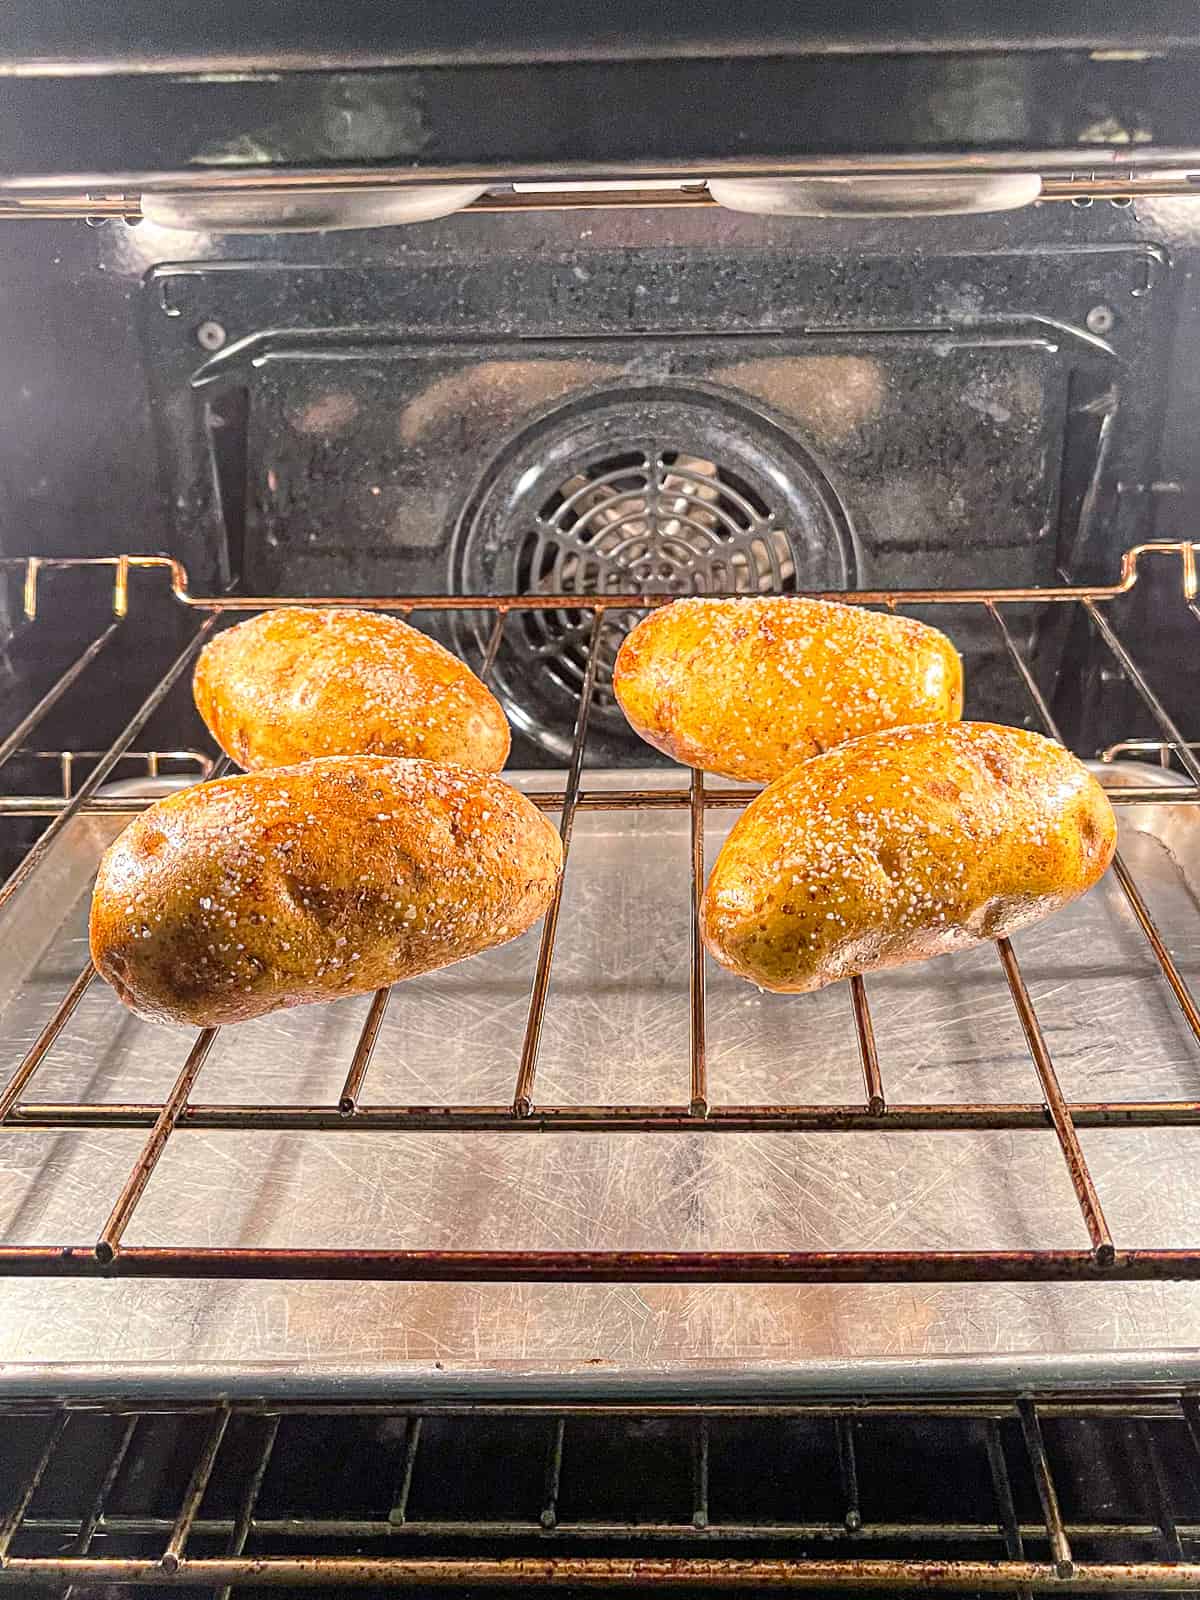 Four potatoes on the rack of an oven with a pan below it on another rack.